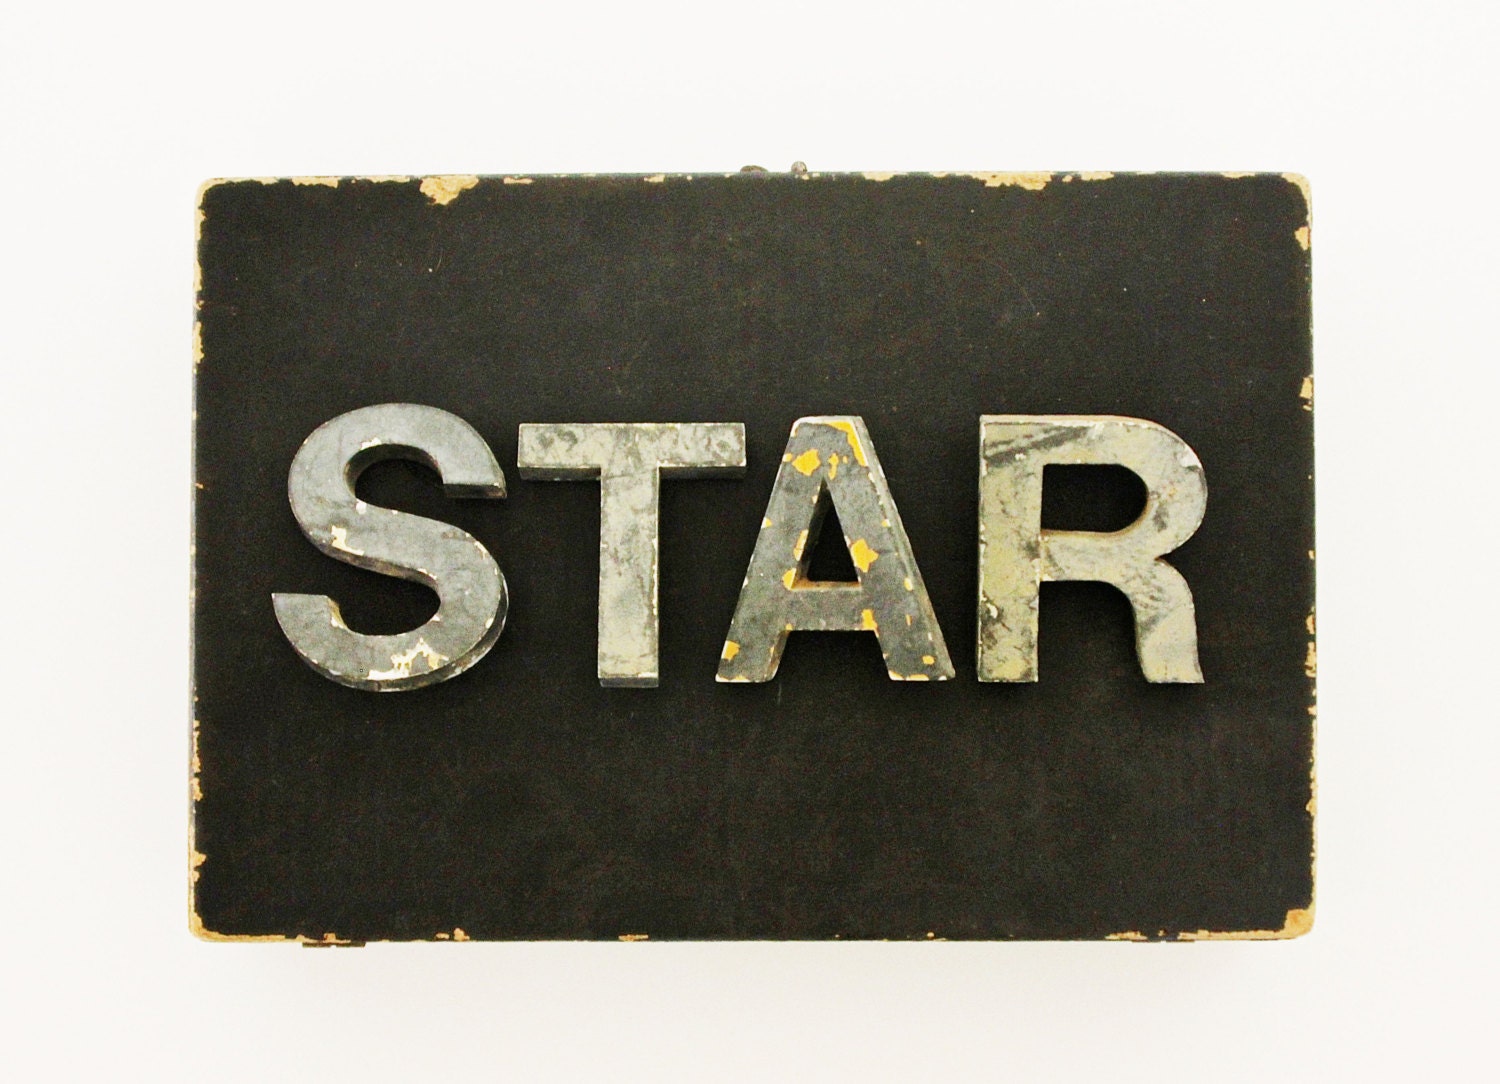 STAR - Vintage Letters - Vintage Marquee Letters - Large - Sign - Home Decor - Industrial - Metal - Supplies - NIght - becaruns